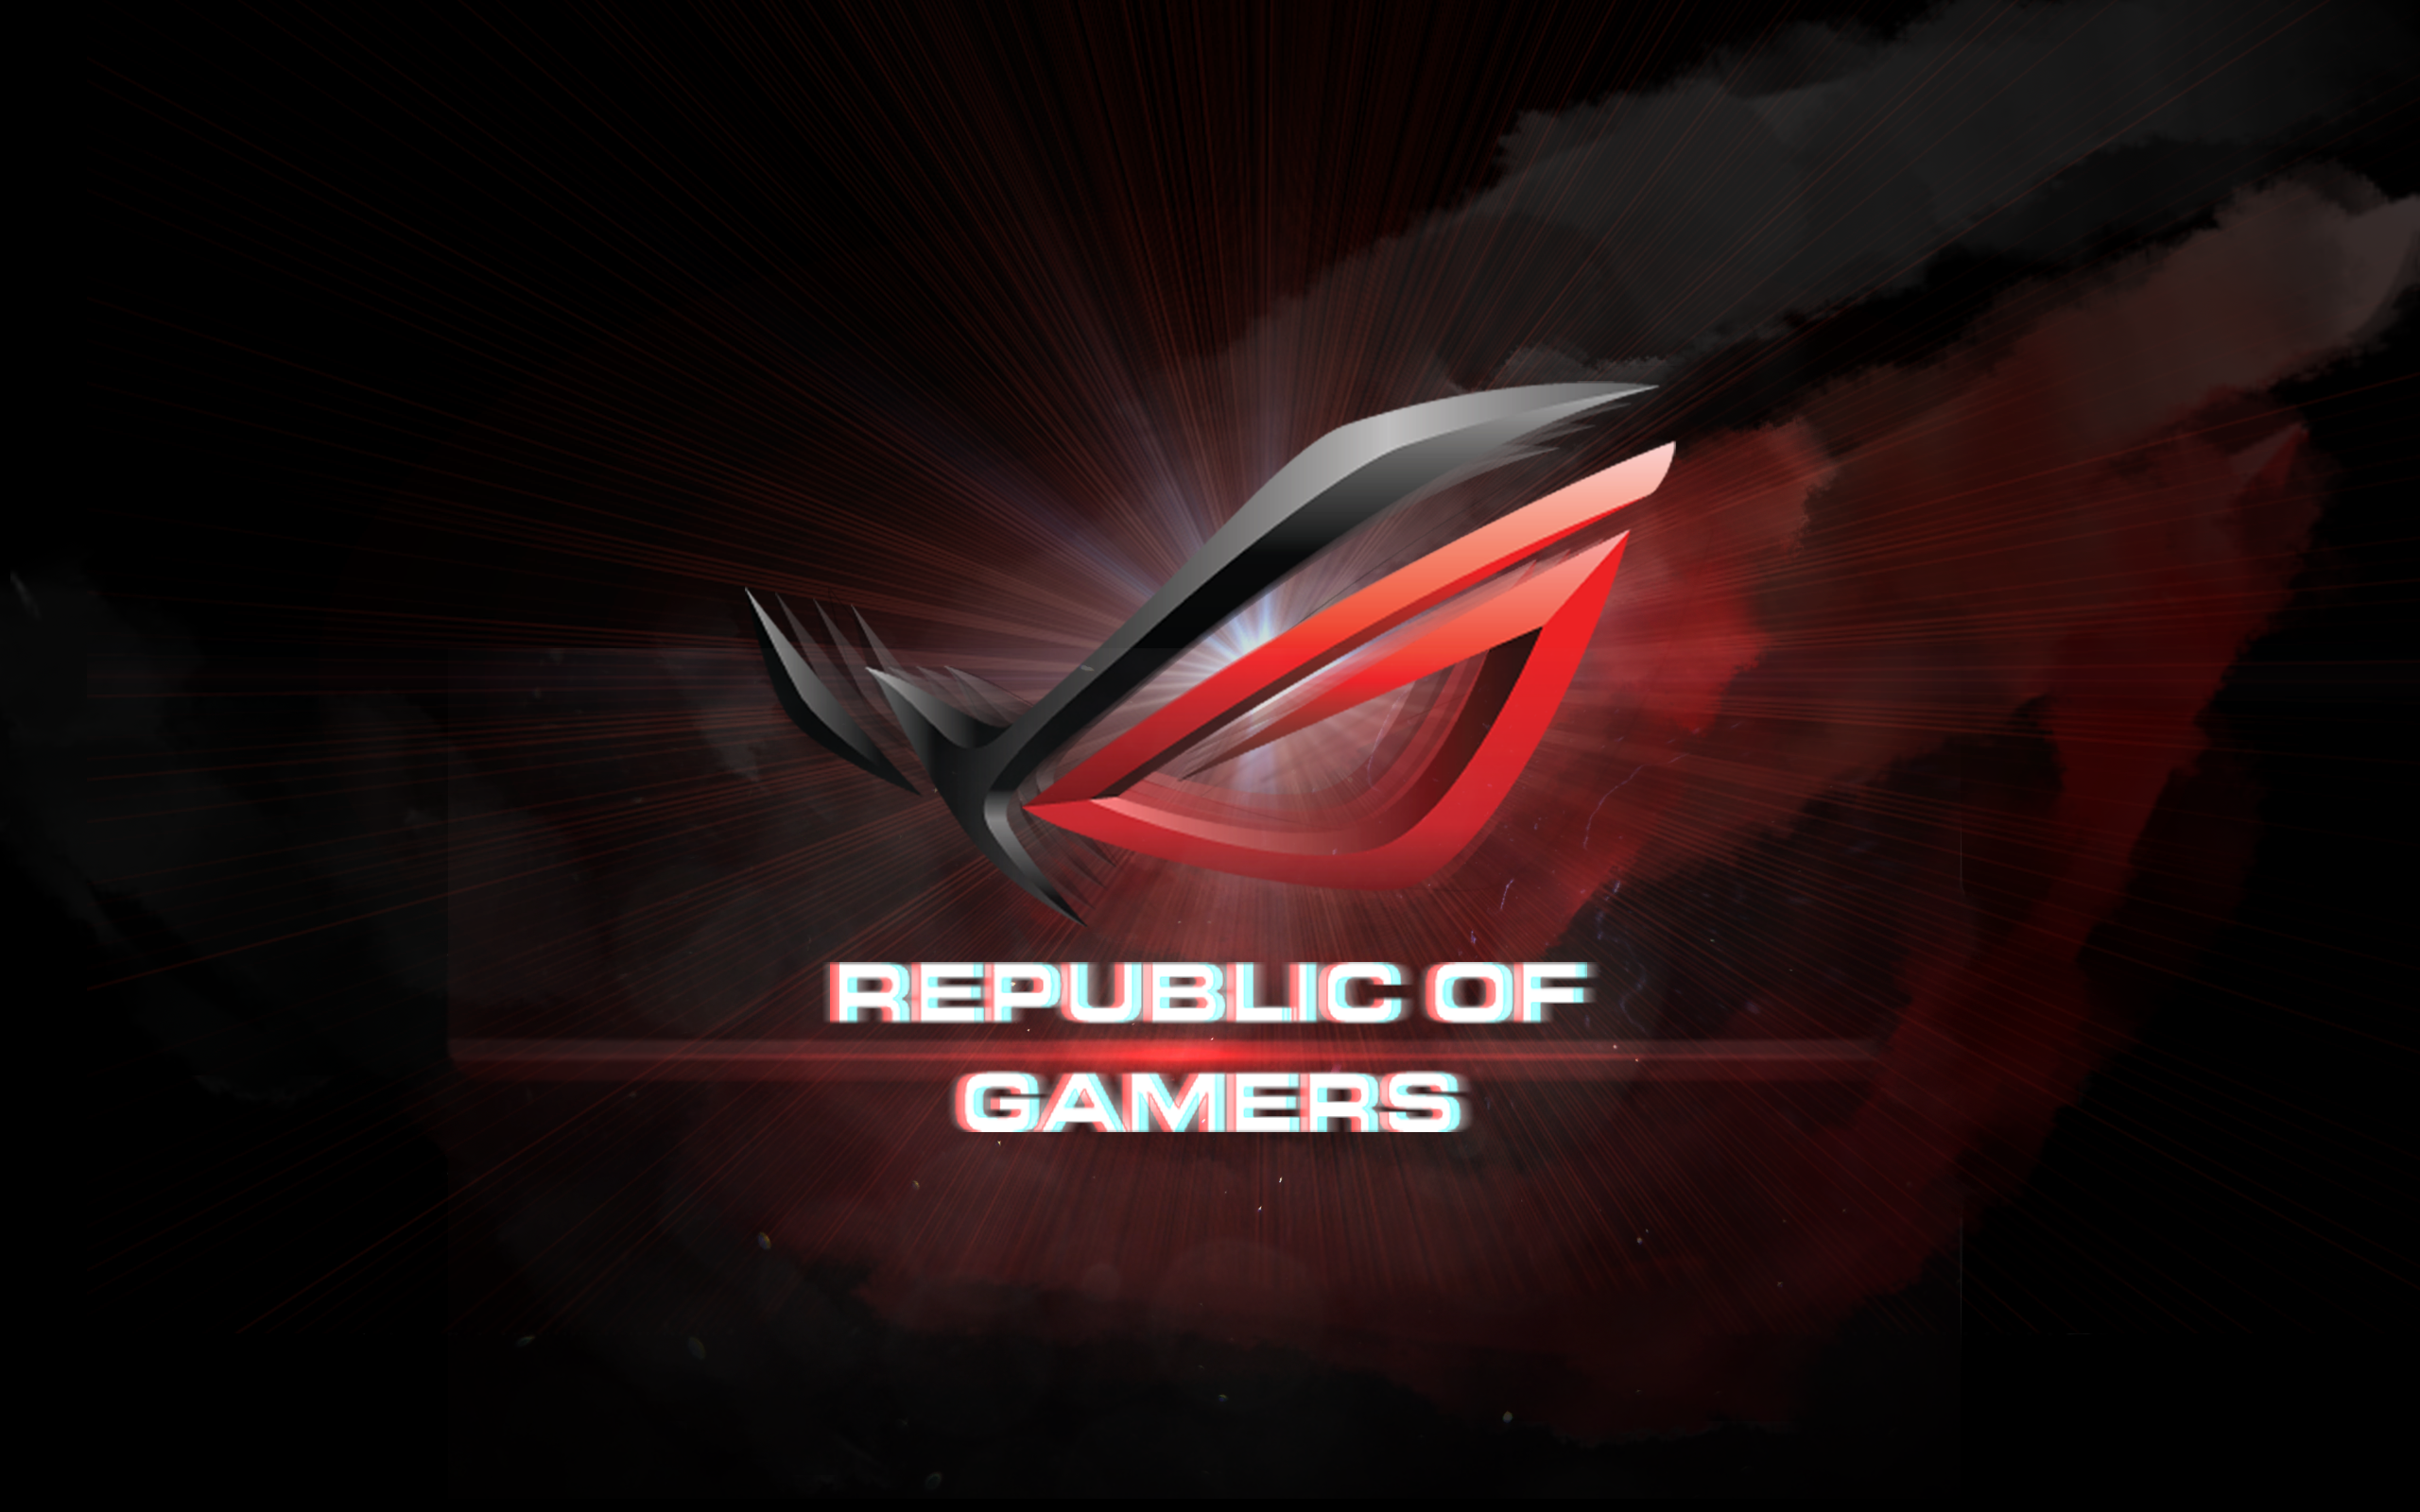 Rog Wallpaper Collection 2013 - Republic Of Gamers - 2560x1600 Wallpaper -  